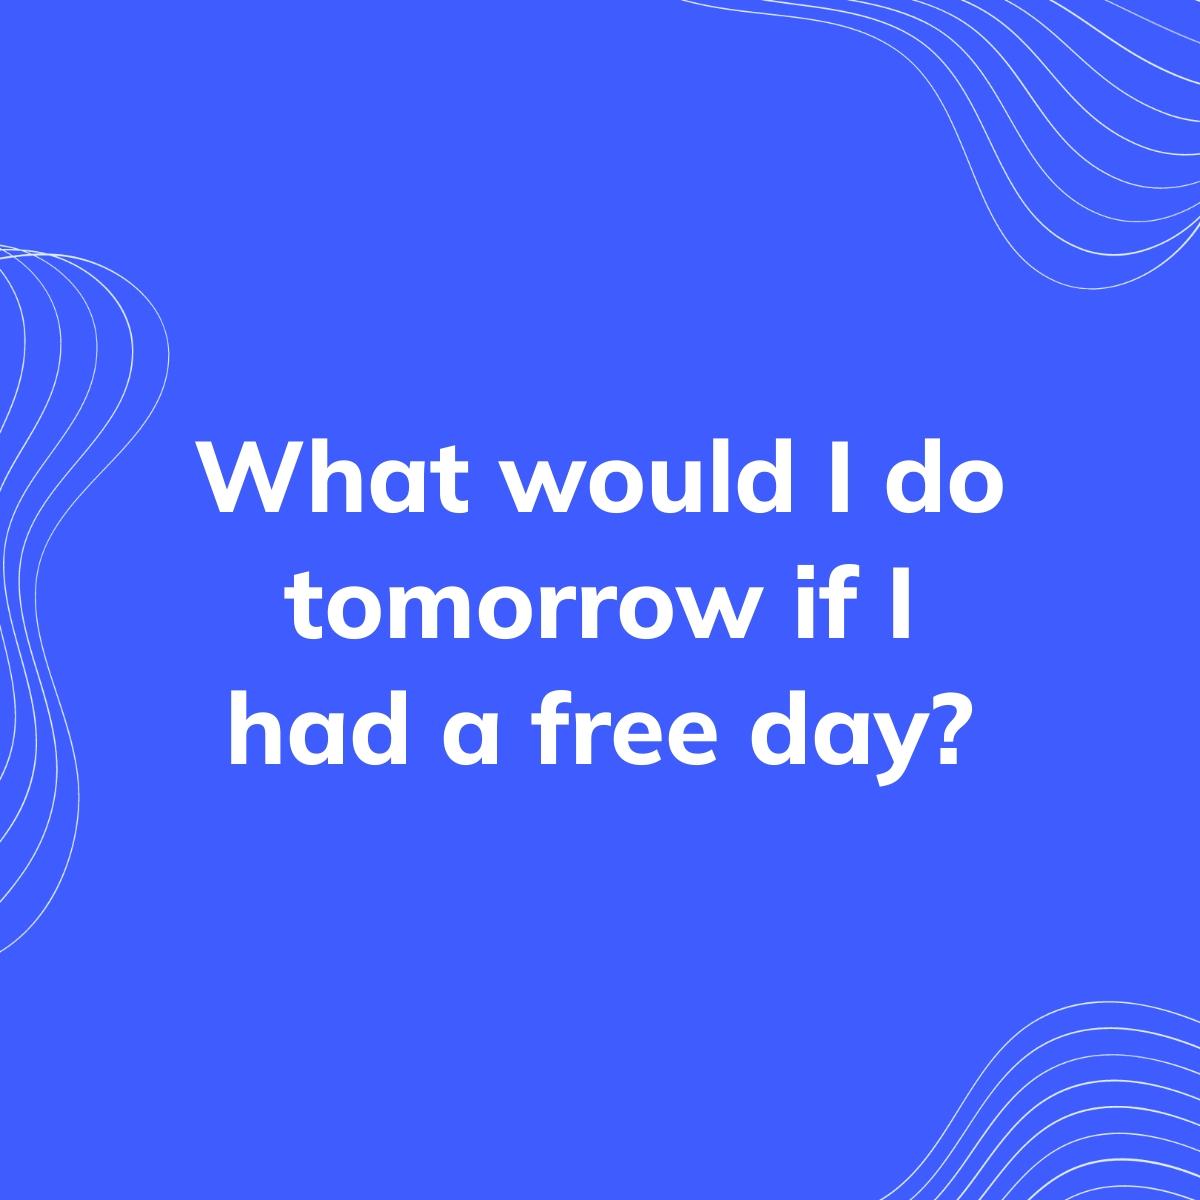 Journal Prompt: What would I do tomorrow if I had a free day?